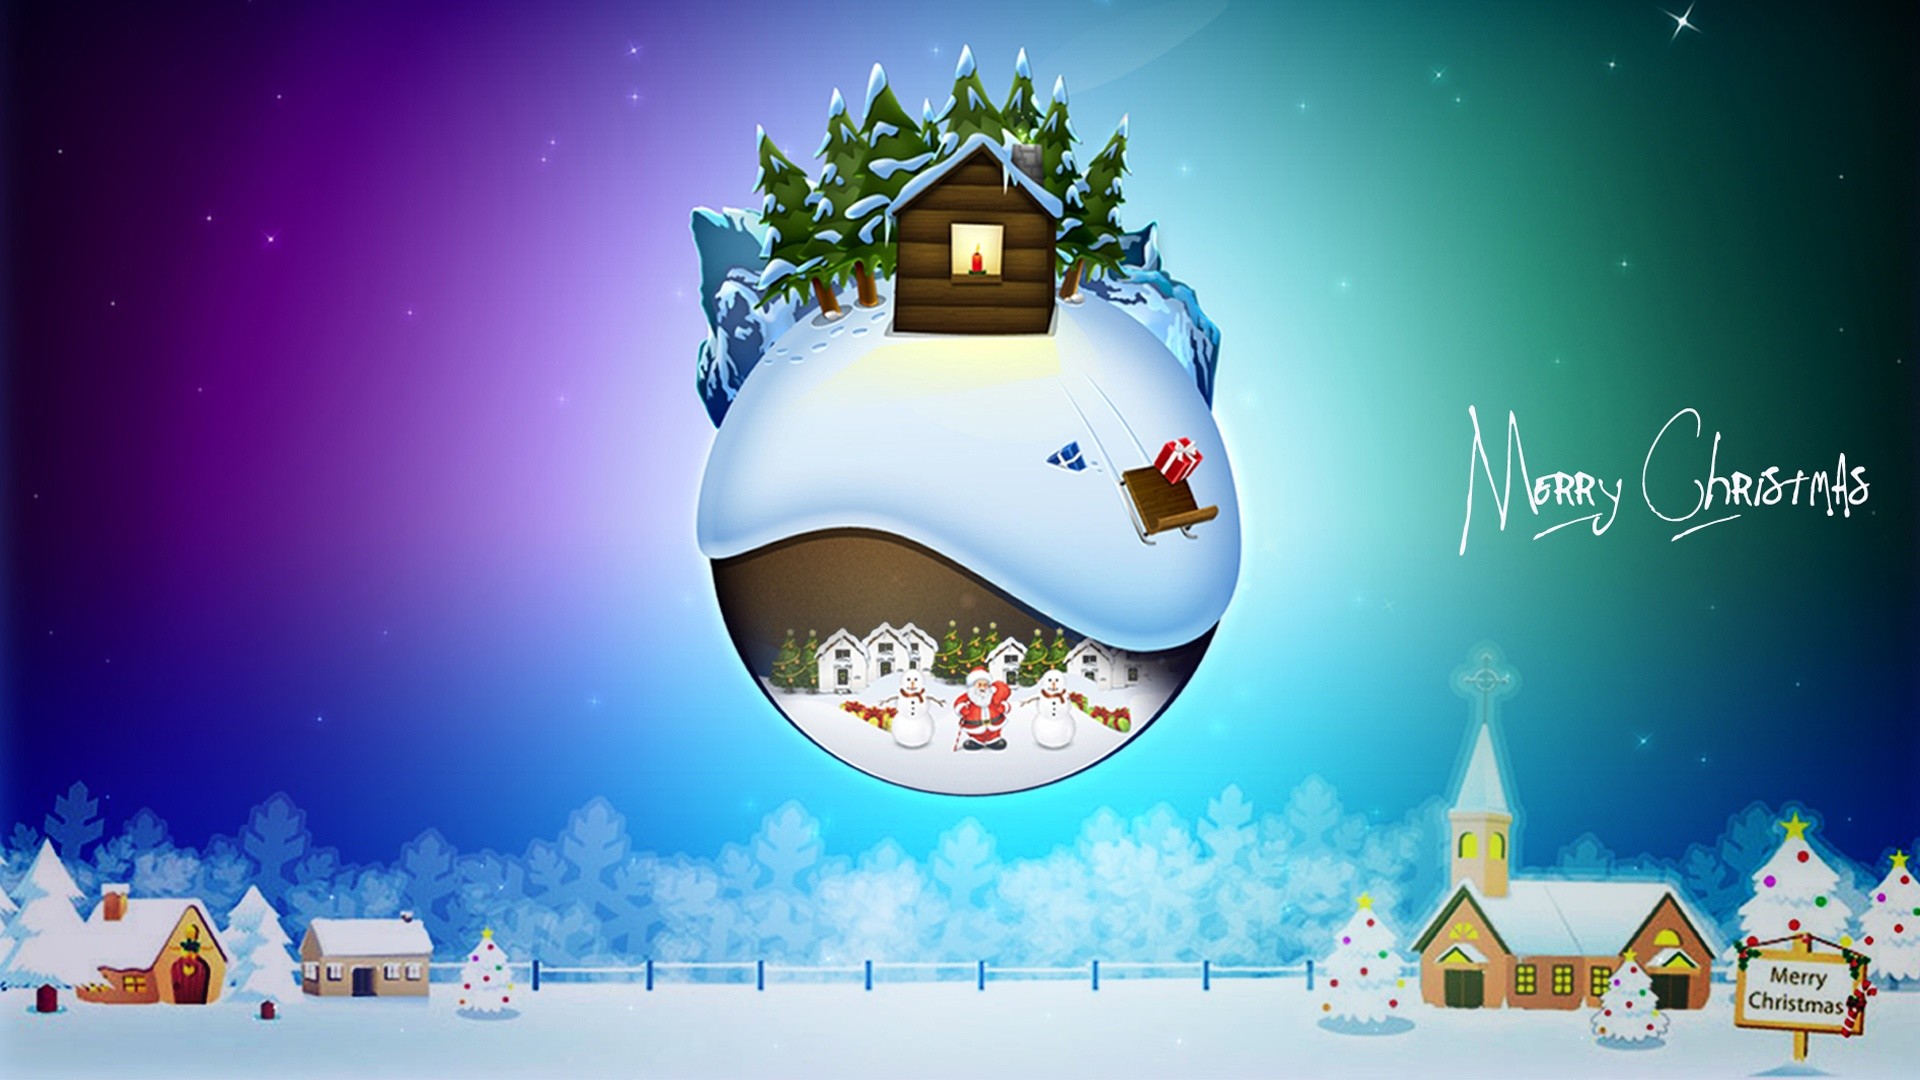 Merry christmas cartoon pictures or wallpapers 2015